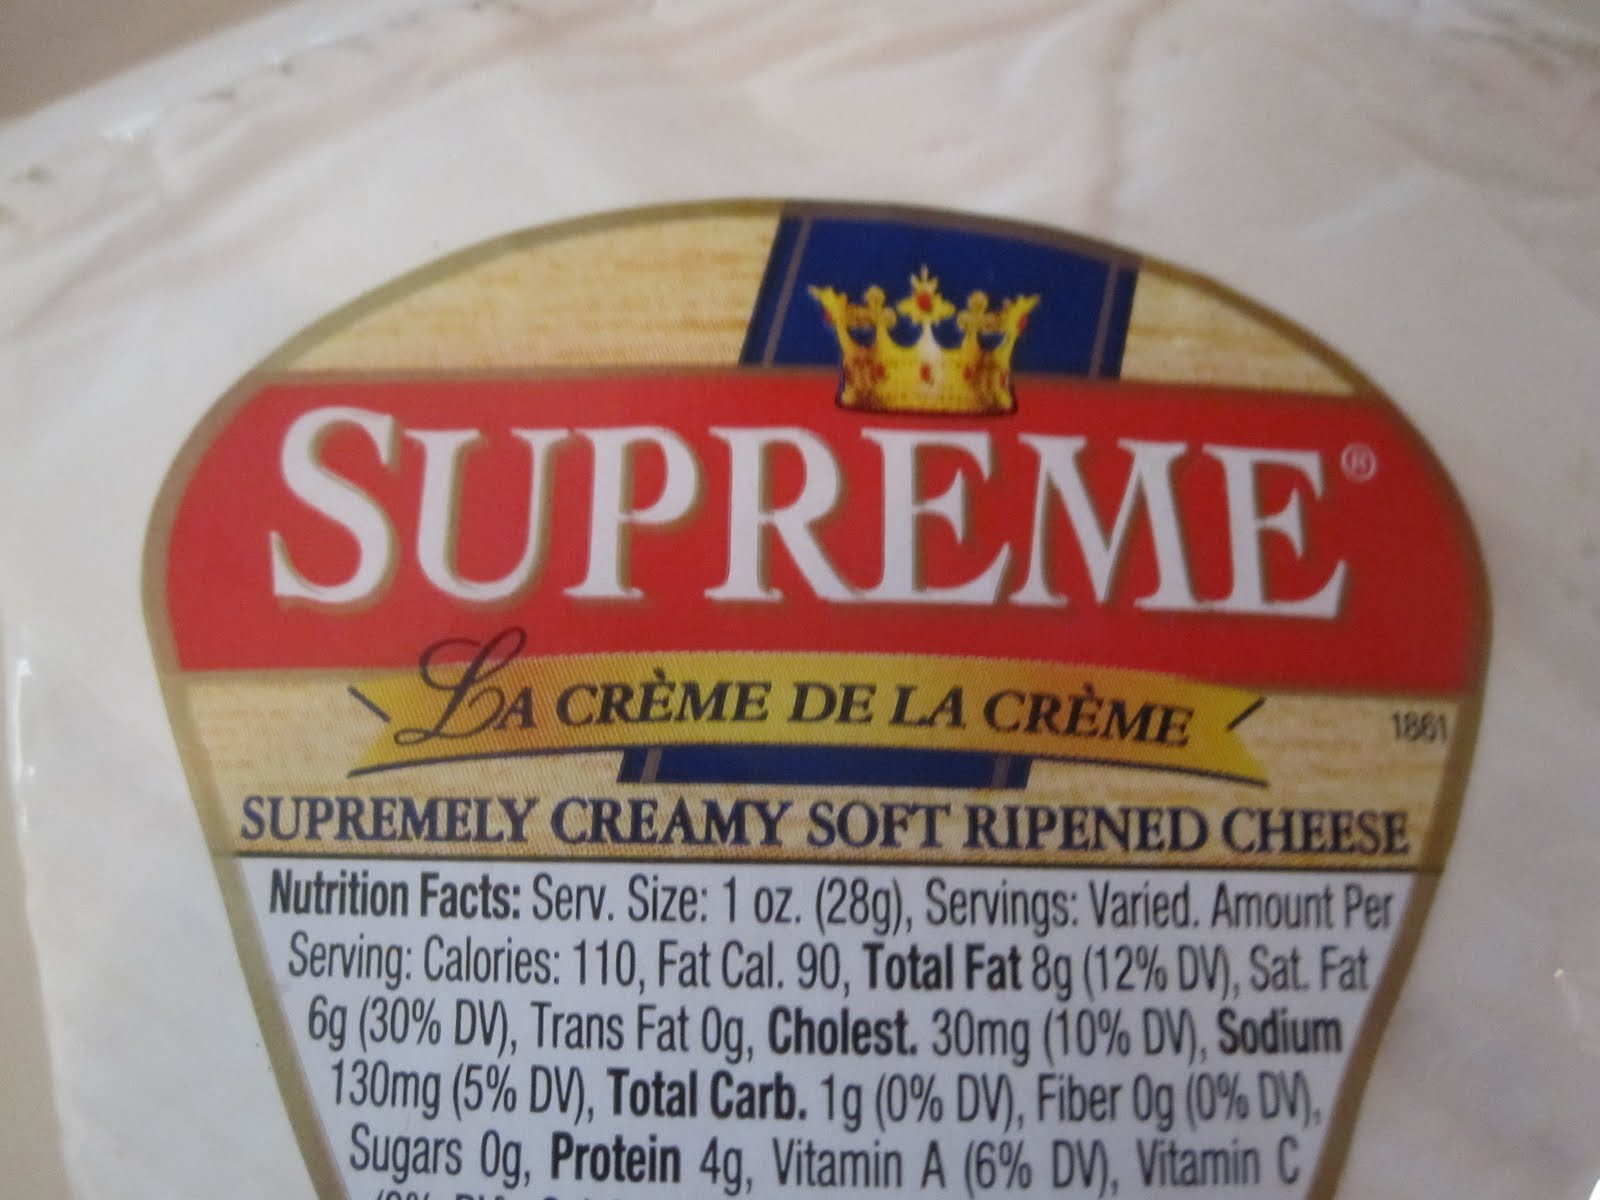 What are some facts about Brie cheese?